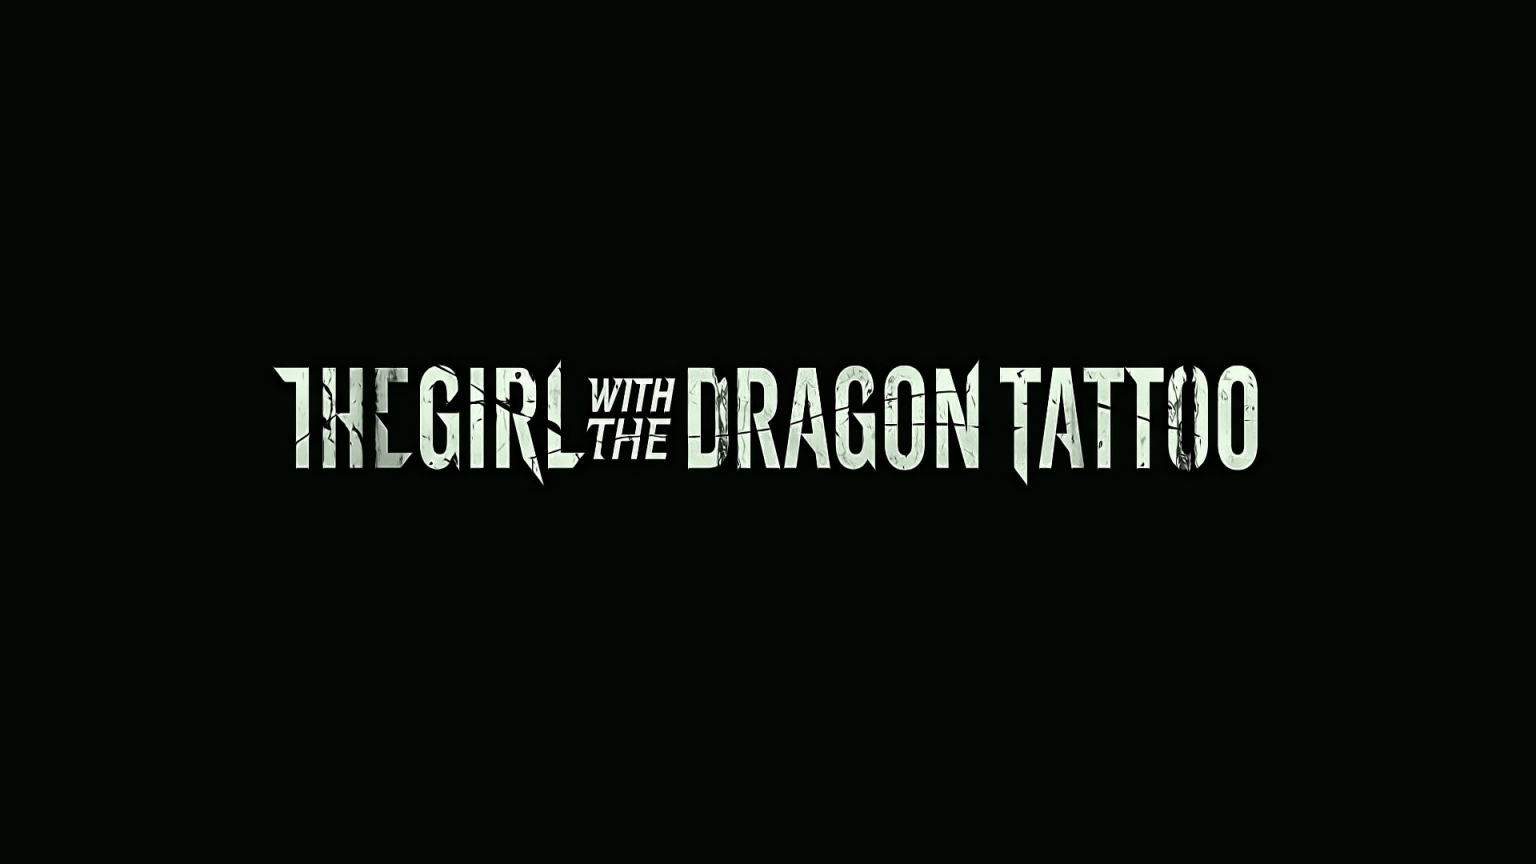 The Girl with the Dragon Tattoo for 1536 x 864 HDTV resolution